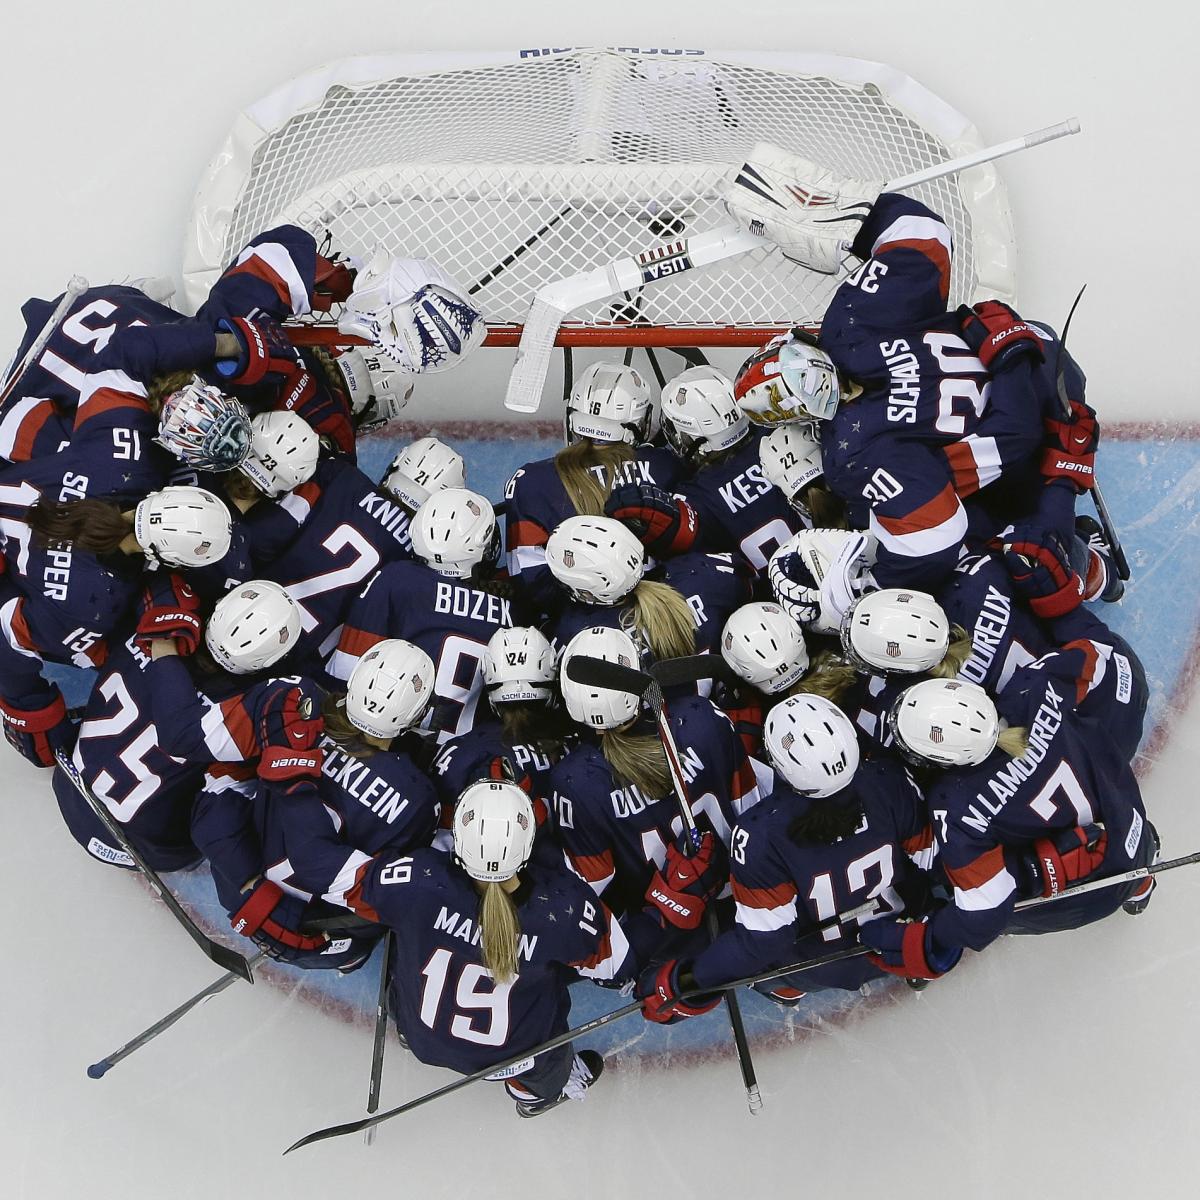 US Olympic Hockey Team 2014: Predictions for Remaining Men's and Women's Games | News, Scores